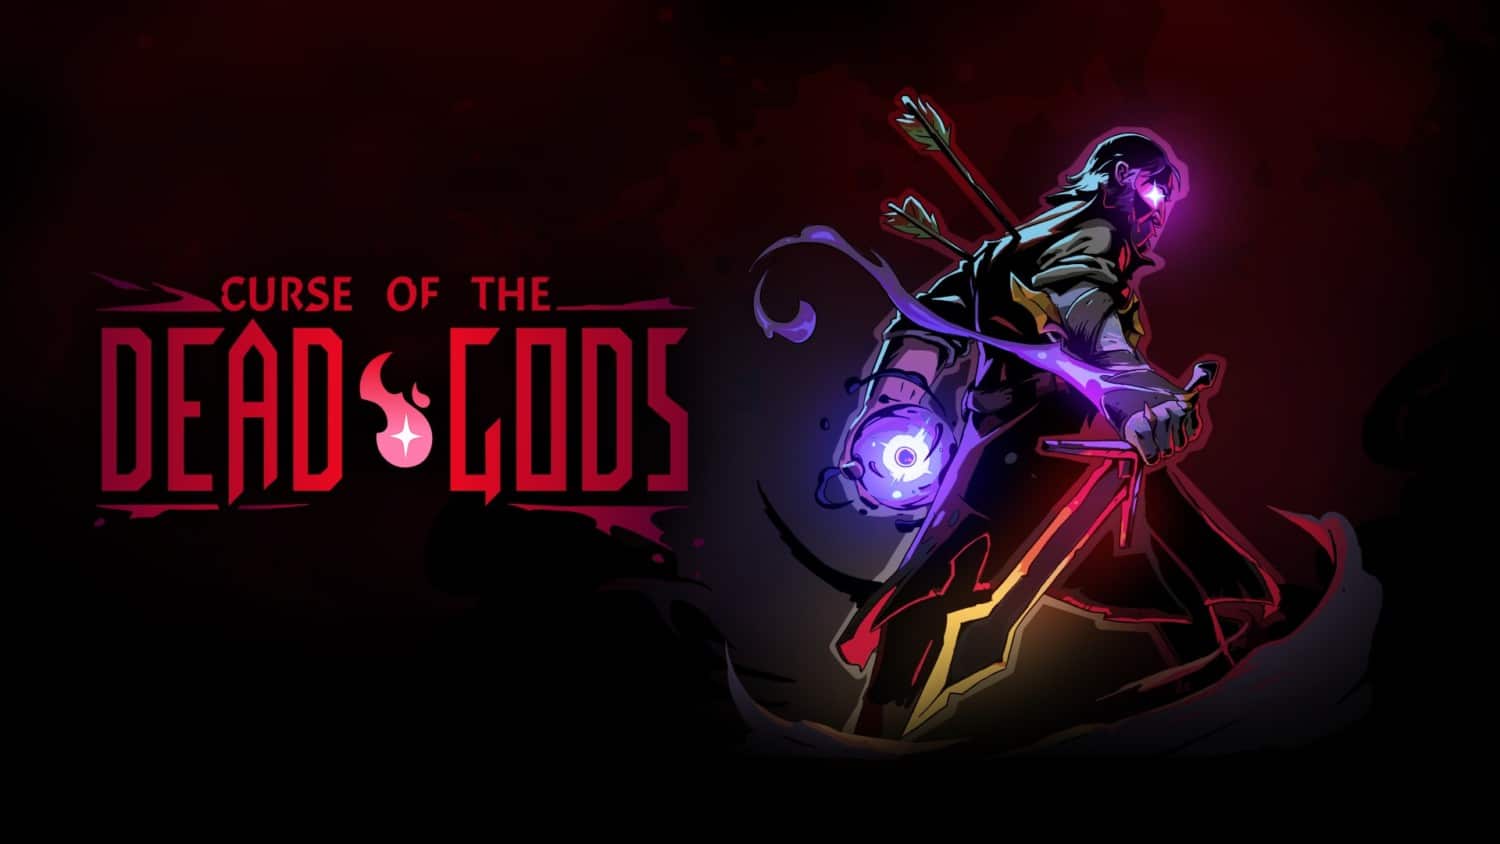 Curse Of The Dead Gods – Free Dead Cells Crossover DLC